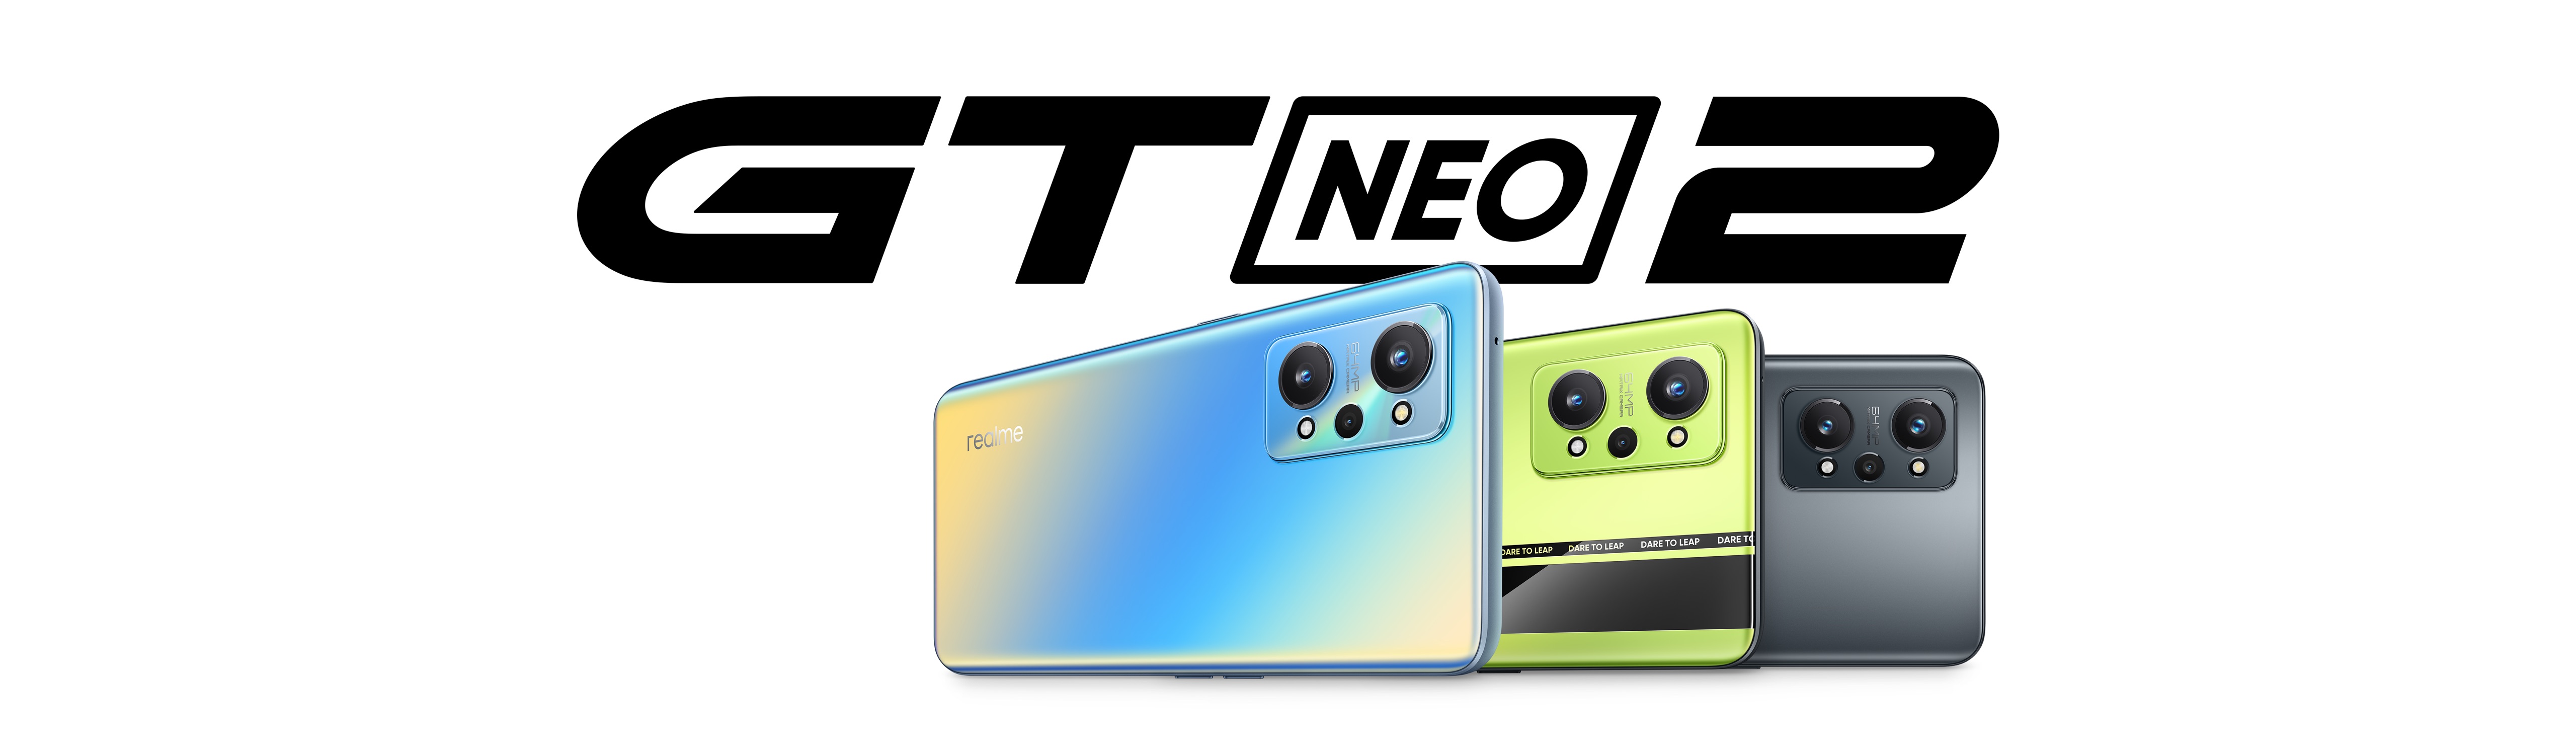 Realme GT Neo 2 5G 256GB gaming phone